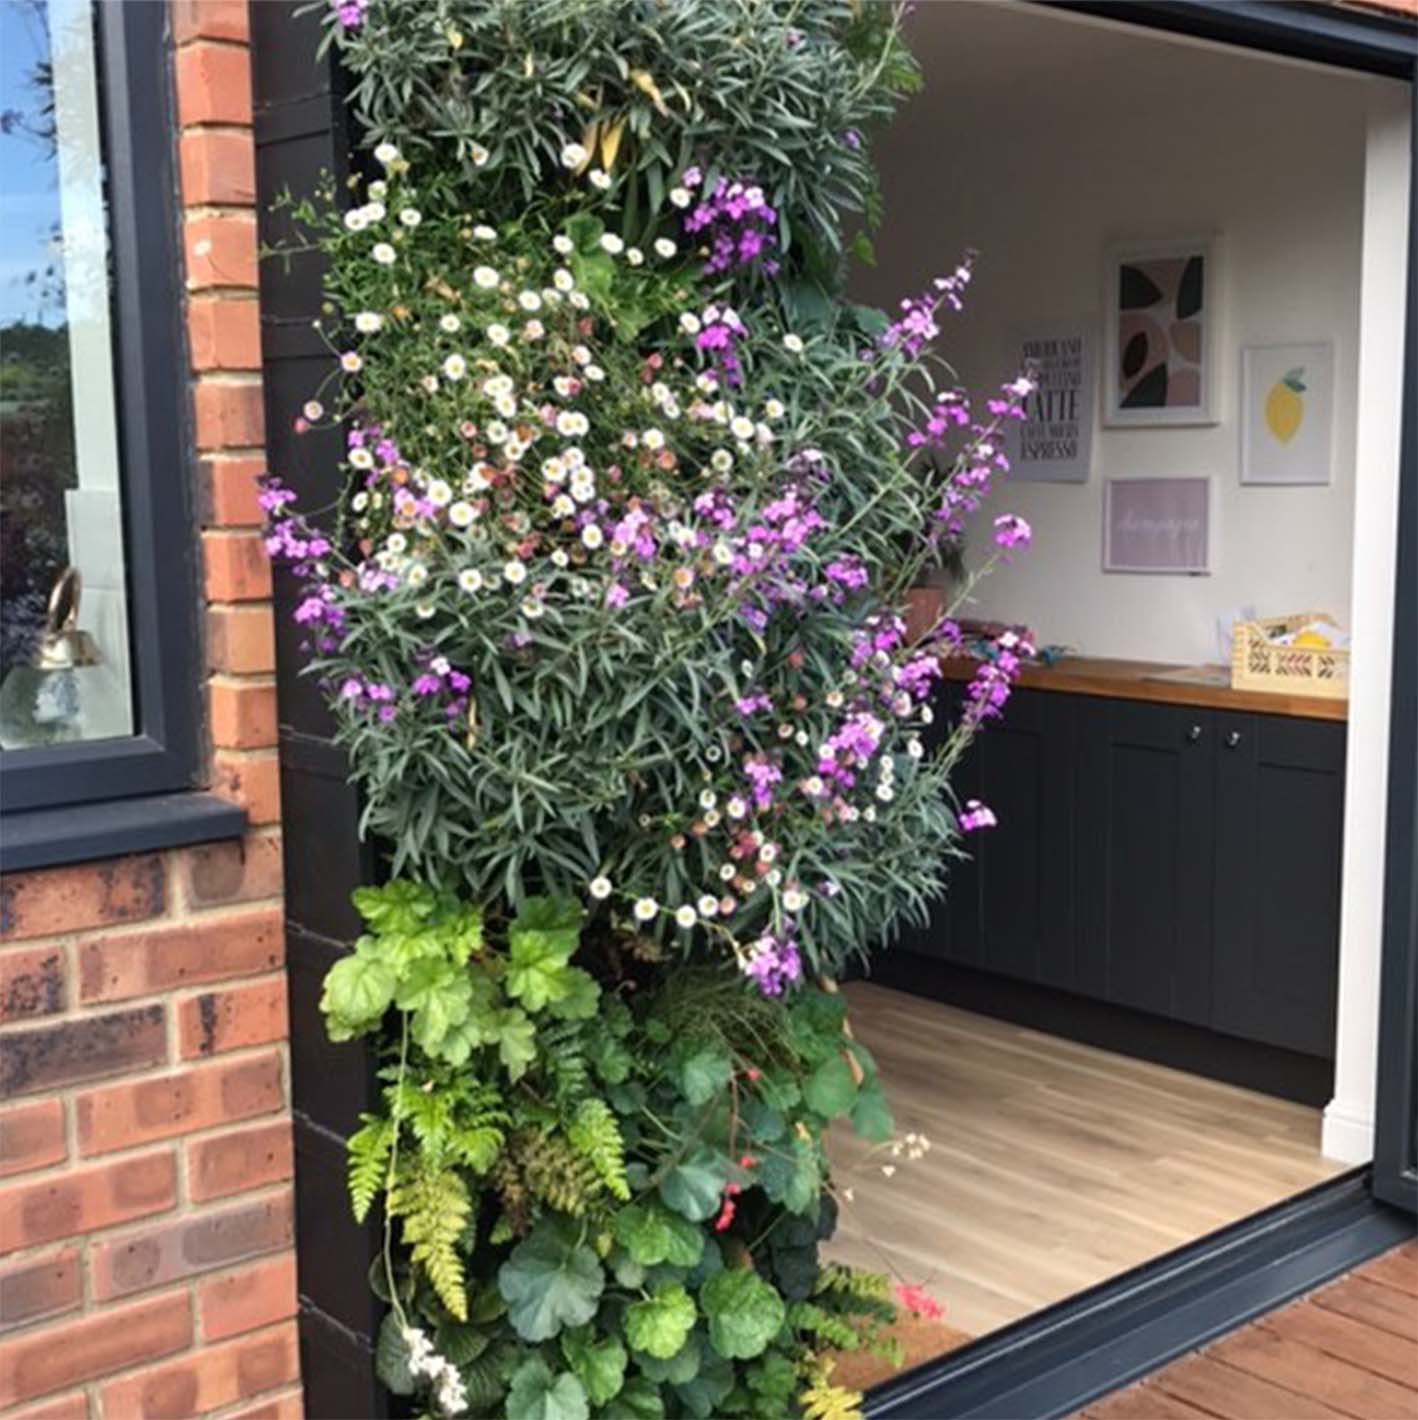 A colourful Vertical Garden full of purple and white plants